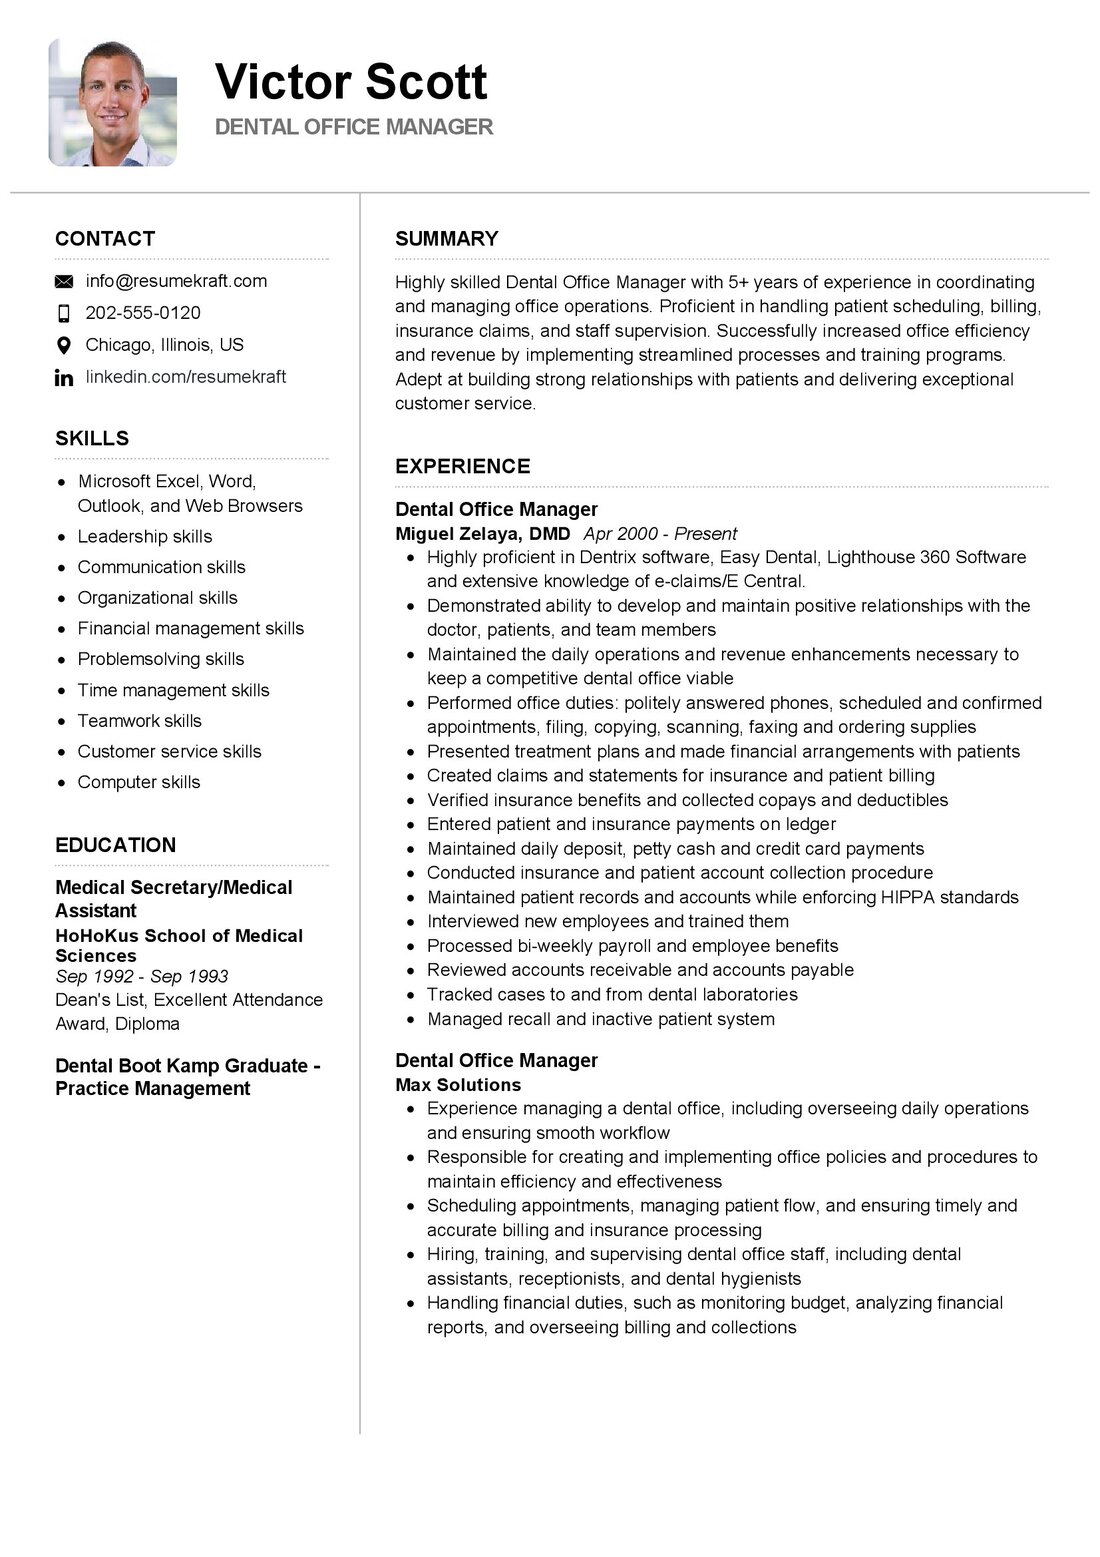 example resume for dental office manager